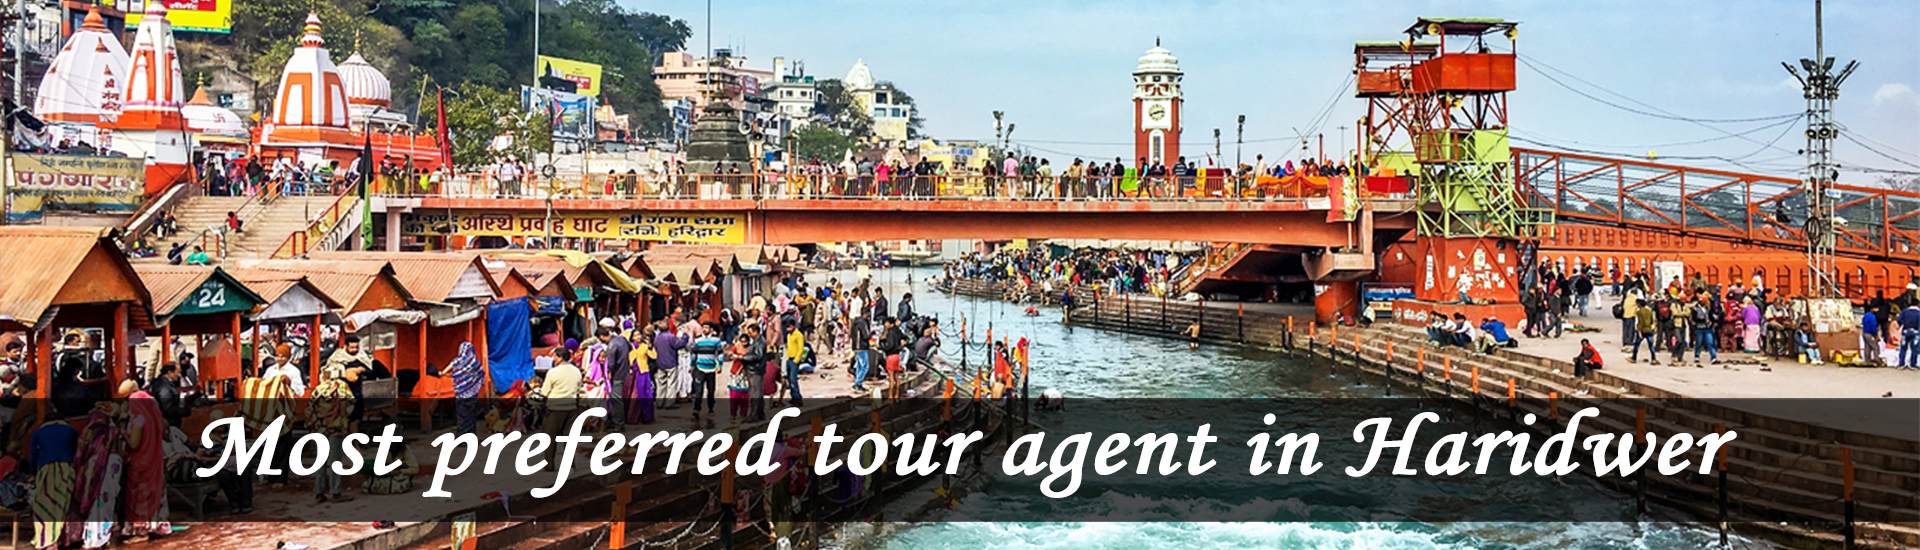 Travel agent in HARIDWAR, Tour operator in Haridwar, Hotel Booking in Haridwar, Tour opeartor for chardham yatra, Chardham package from Haridwar, Do dham package from Haridwar, Adventure tour in Uttarakhand